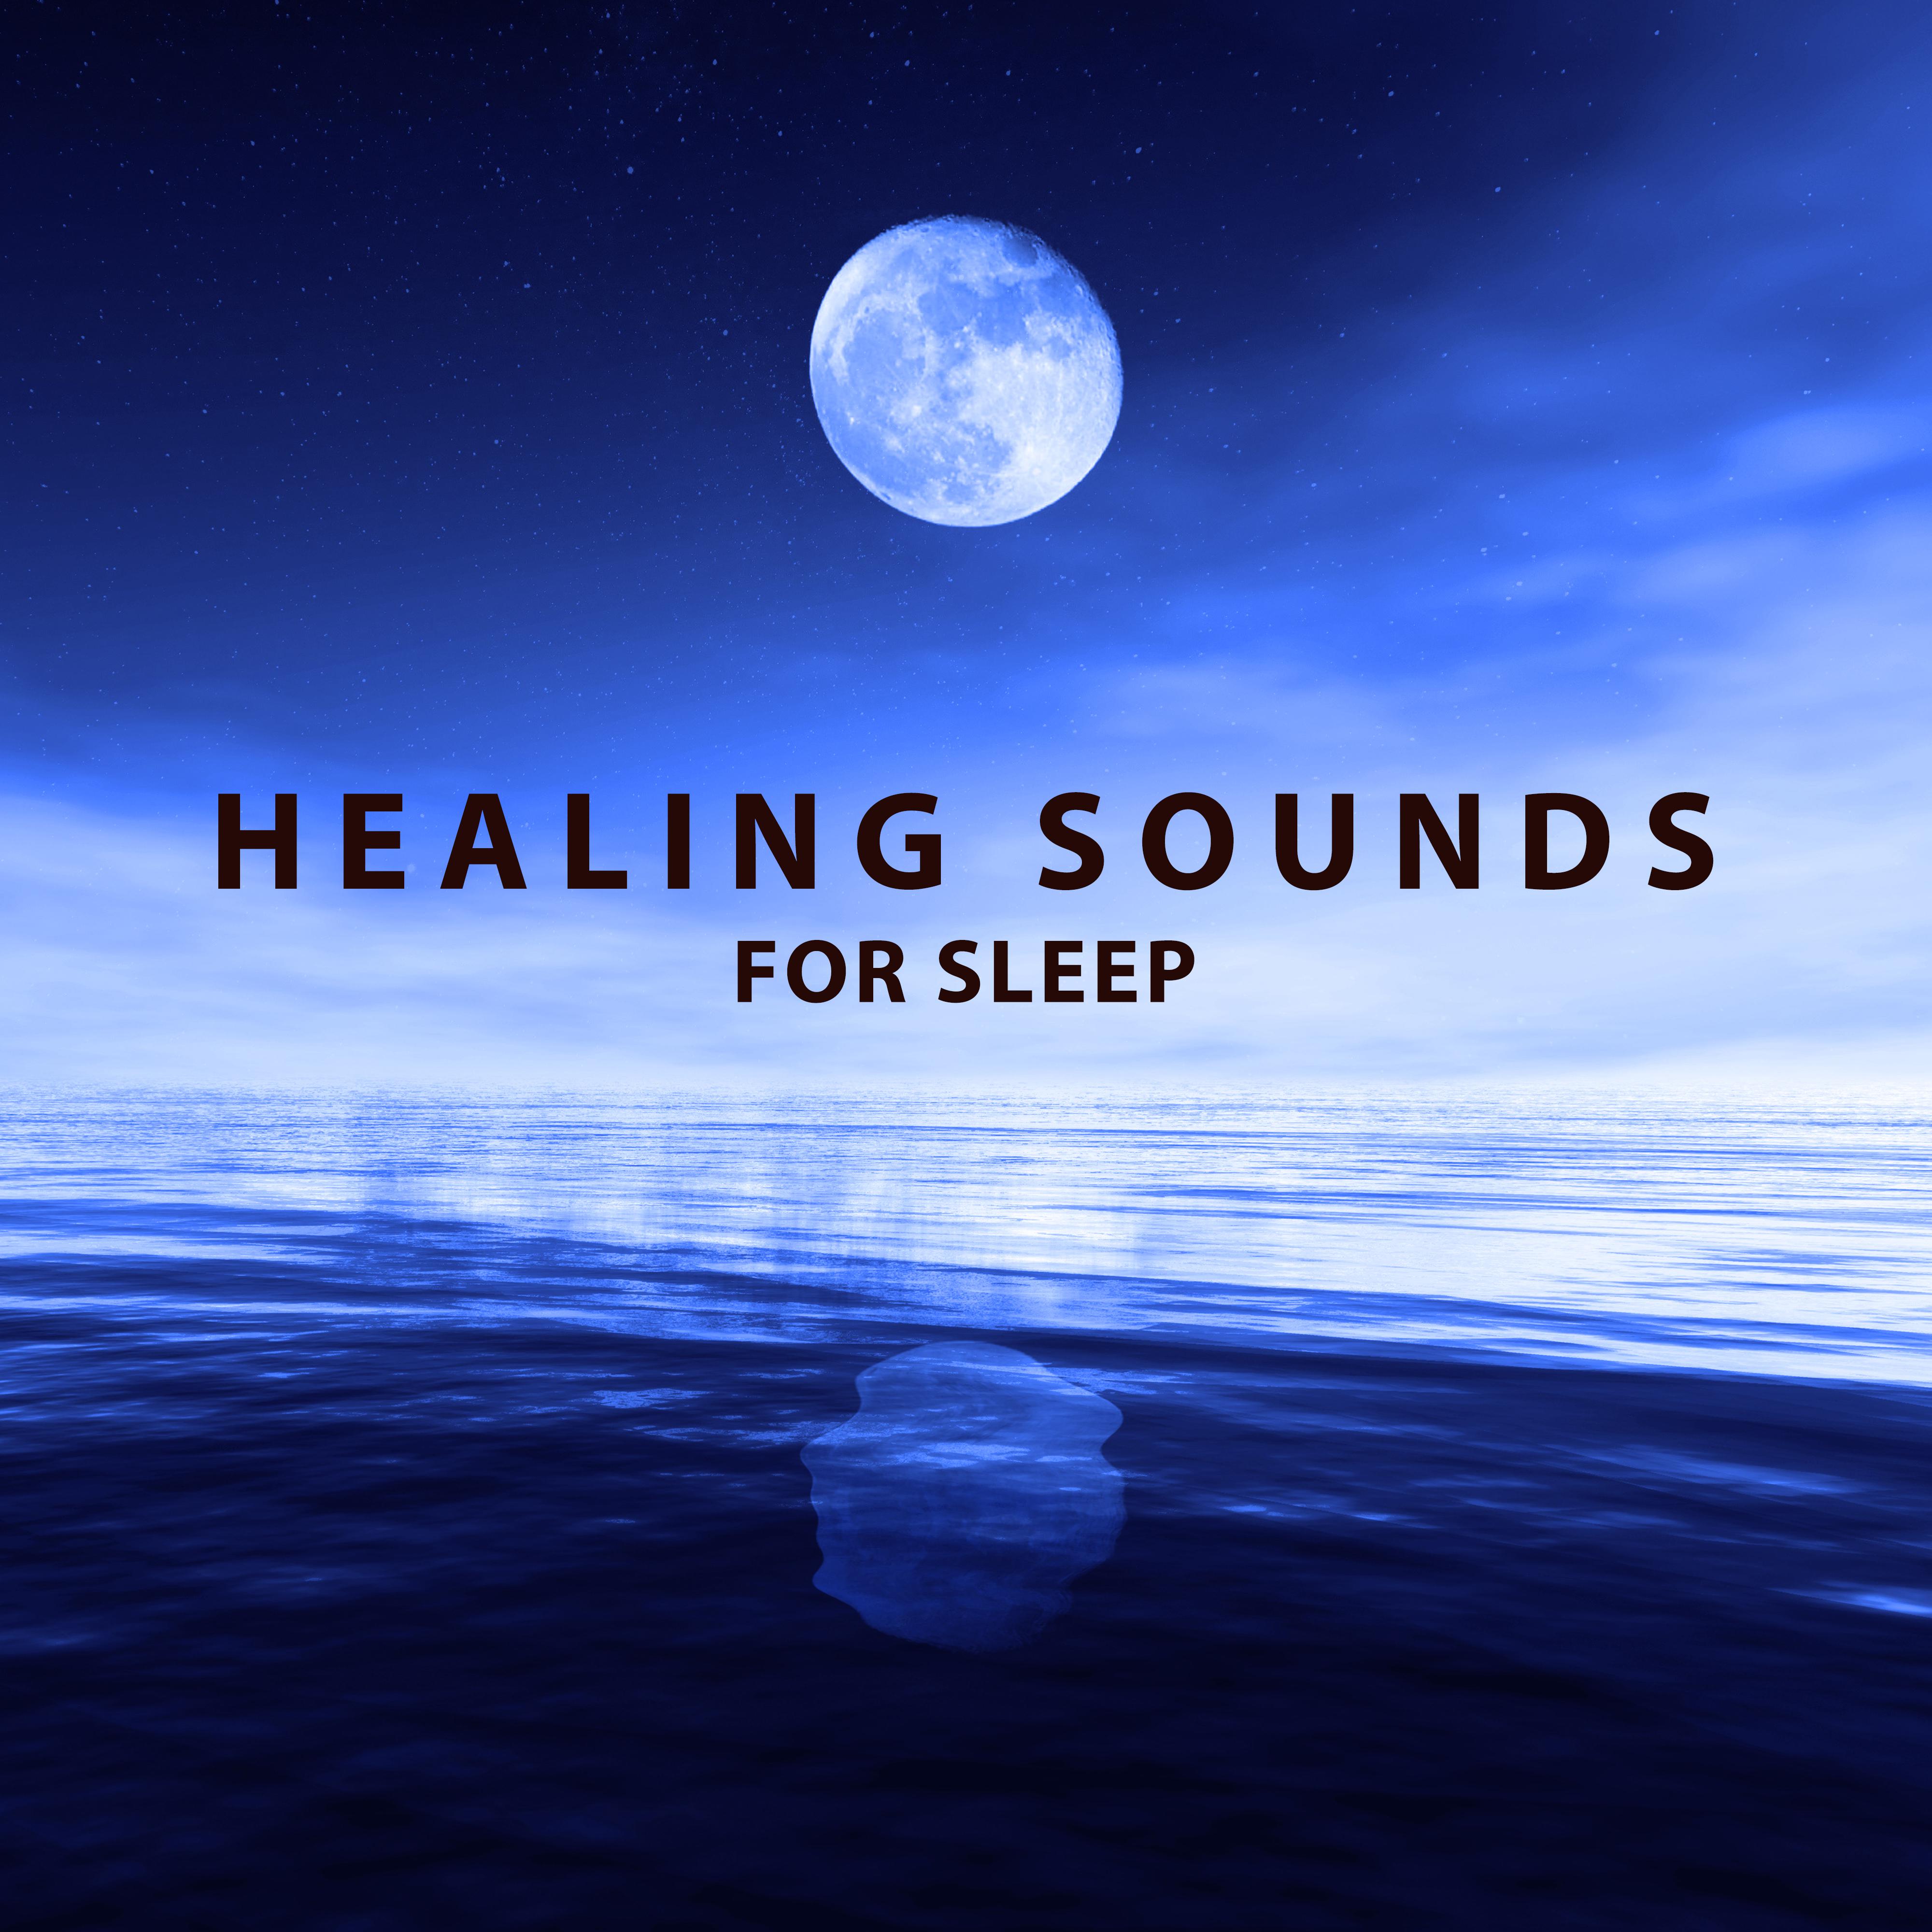 Healing Sounds for Sleep – Calmness, Peaceful Melodies to Bed, Pure Sleep, Calm Mind, Sweet Dreams, Lullabies